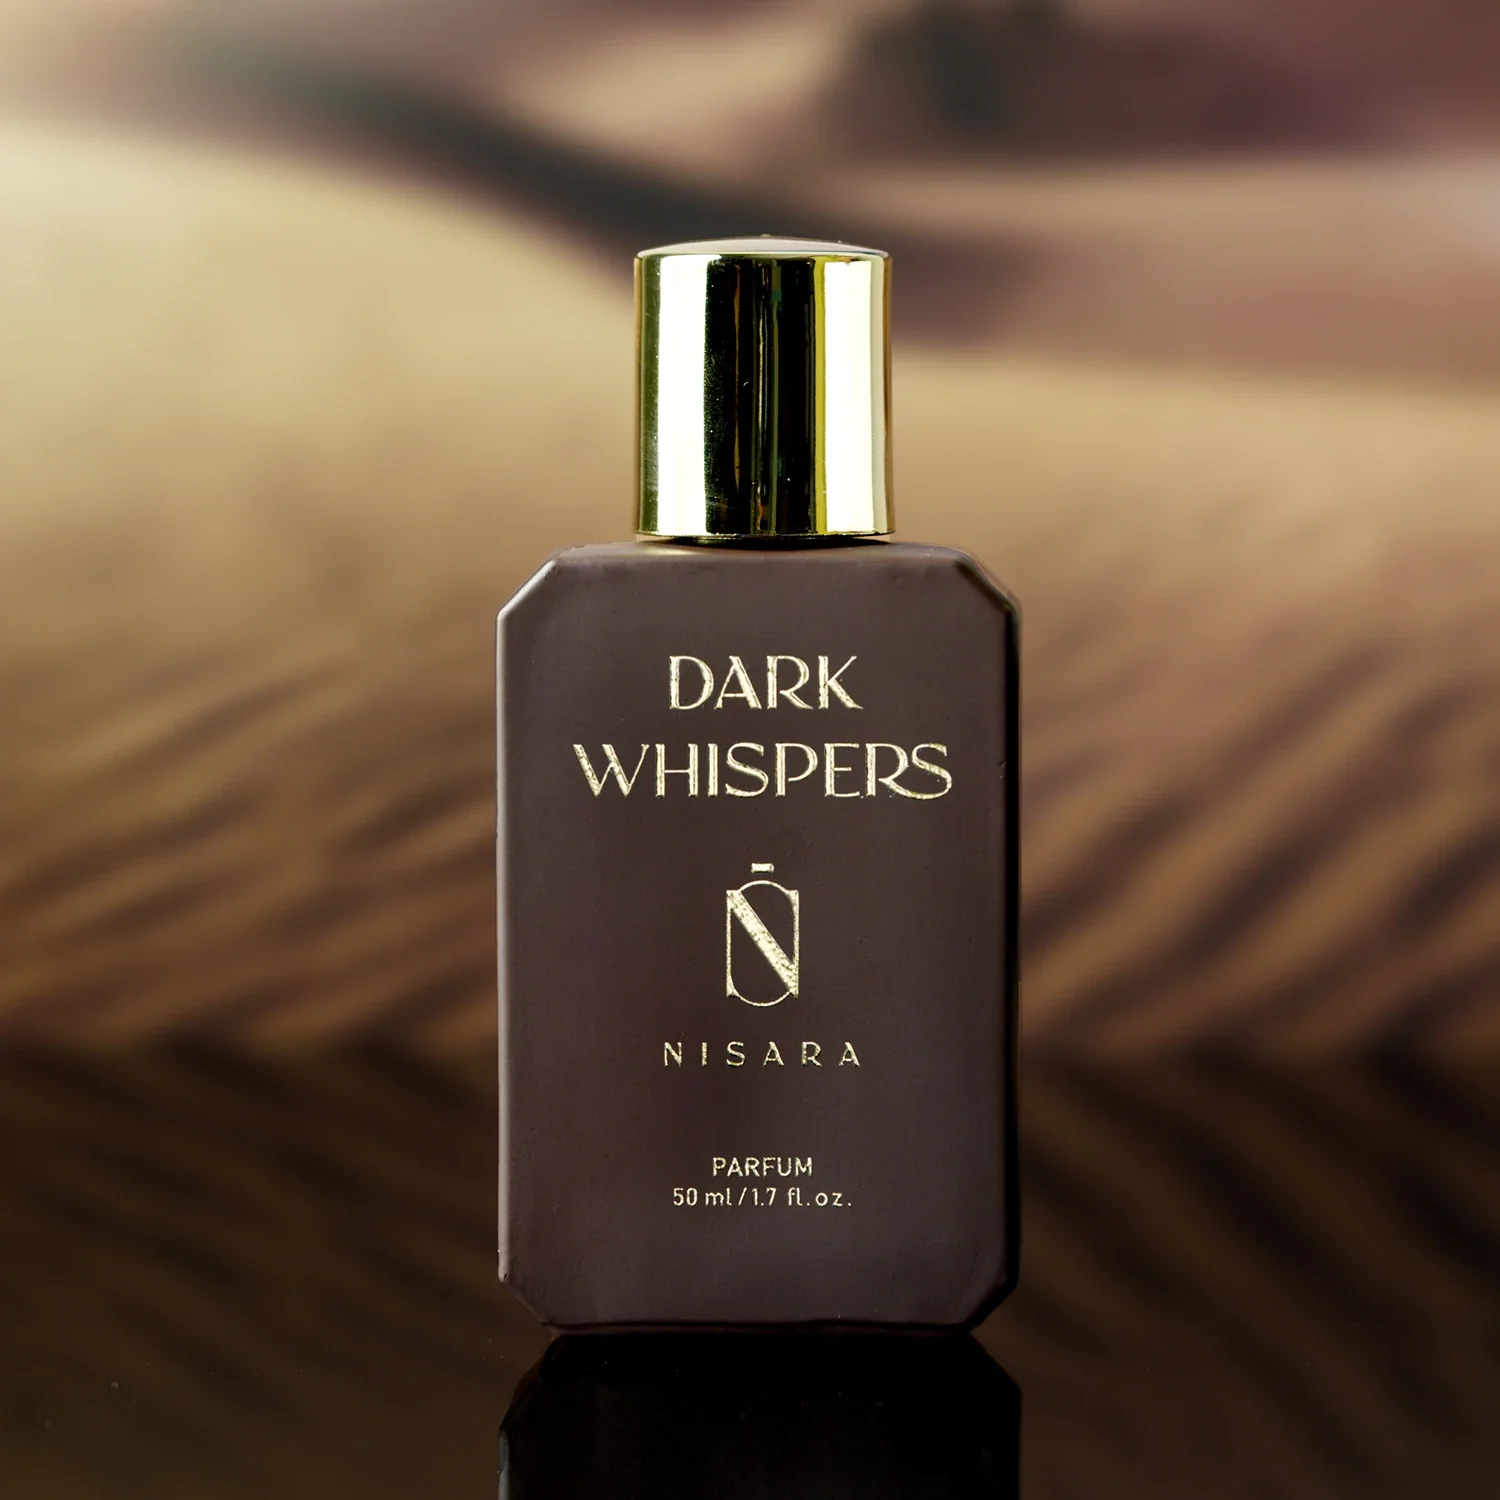  Experience the Intrigue of ‘Dark Whispers’, the New Long Lasting Parfum by Nisara Beauty